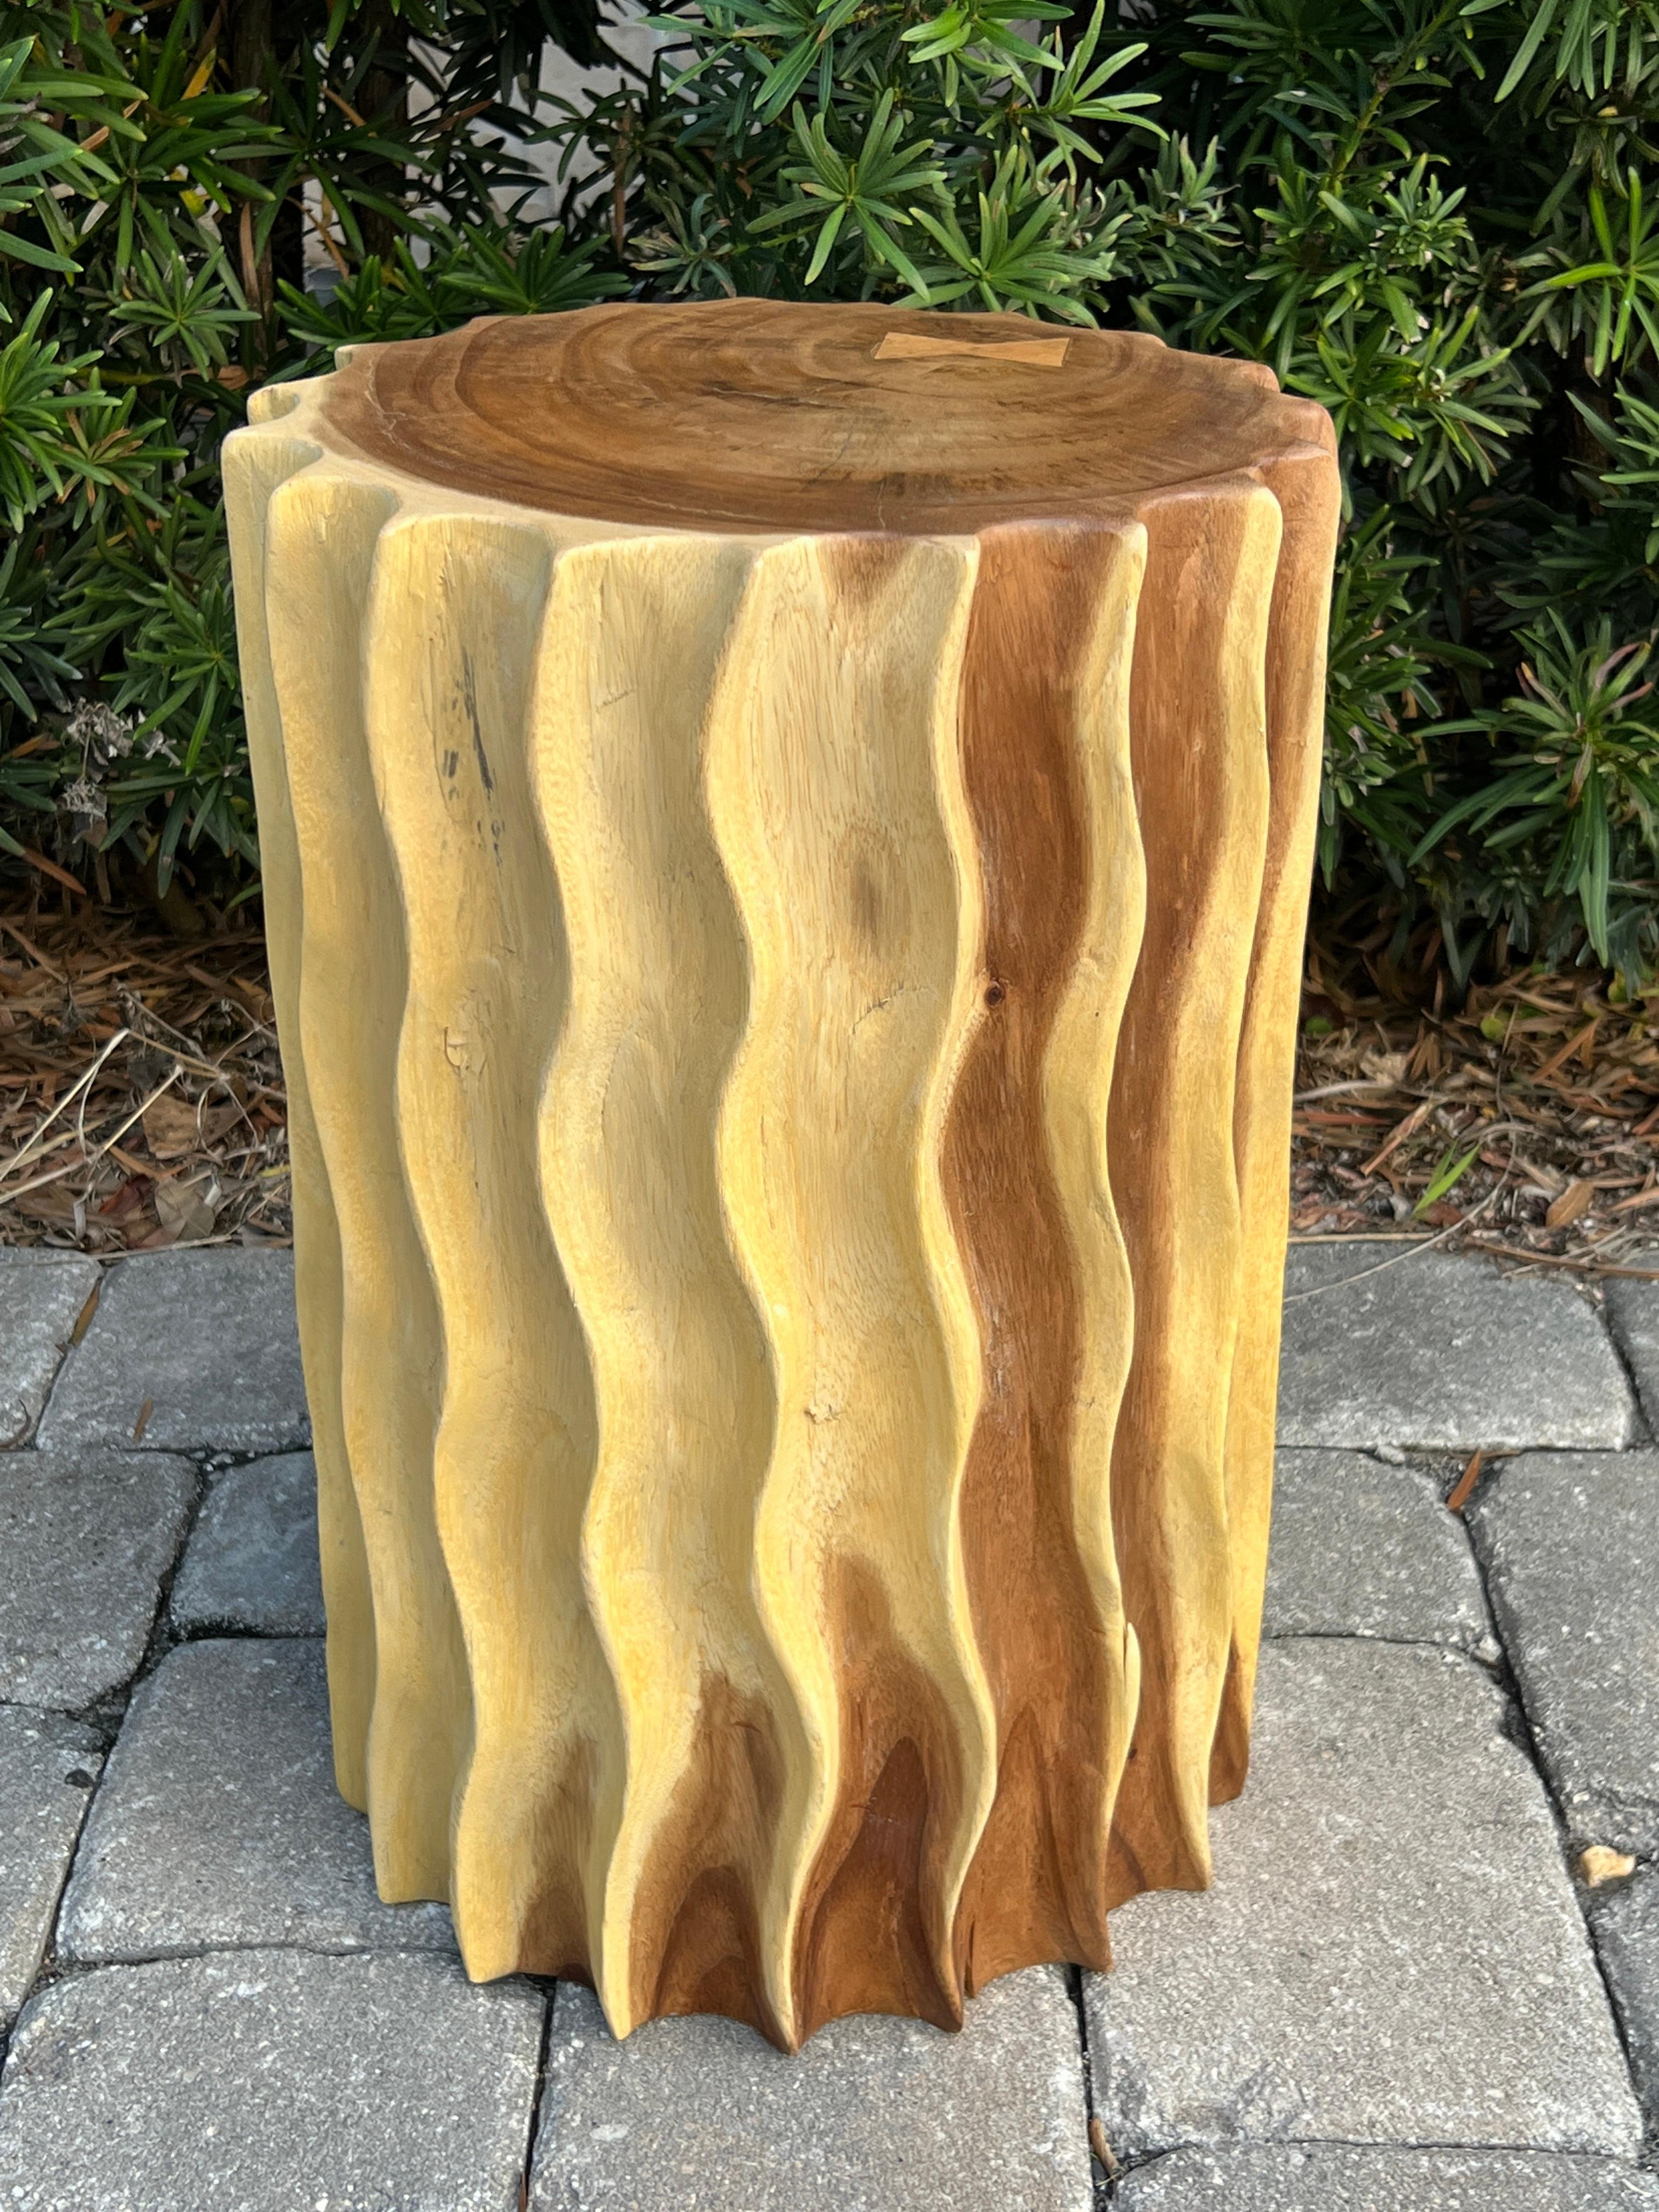 Drum Side Table or Stool in Exotic Suar Wood From Thailand In Good Condition For Sale In Fort Lauderdale, FL